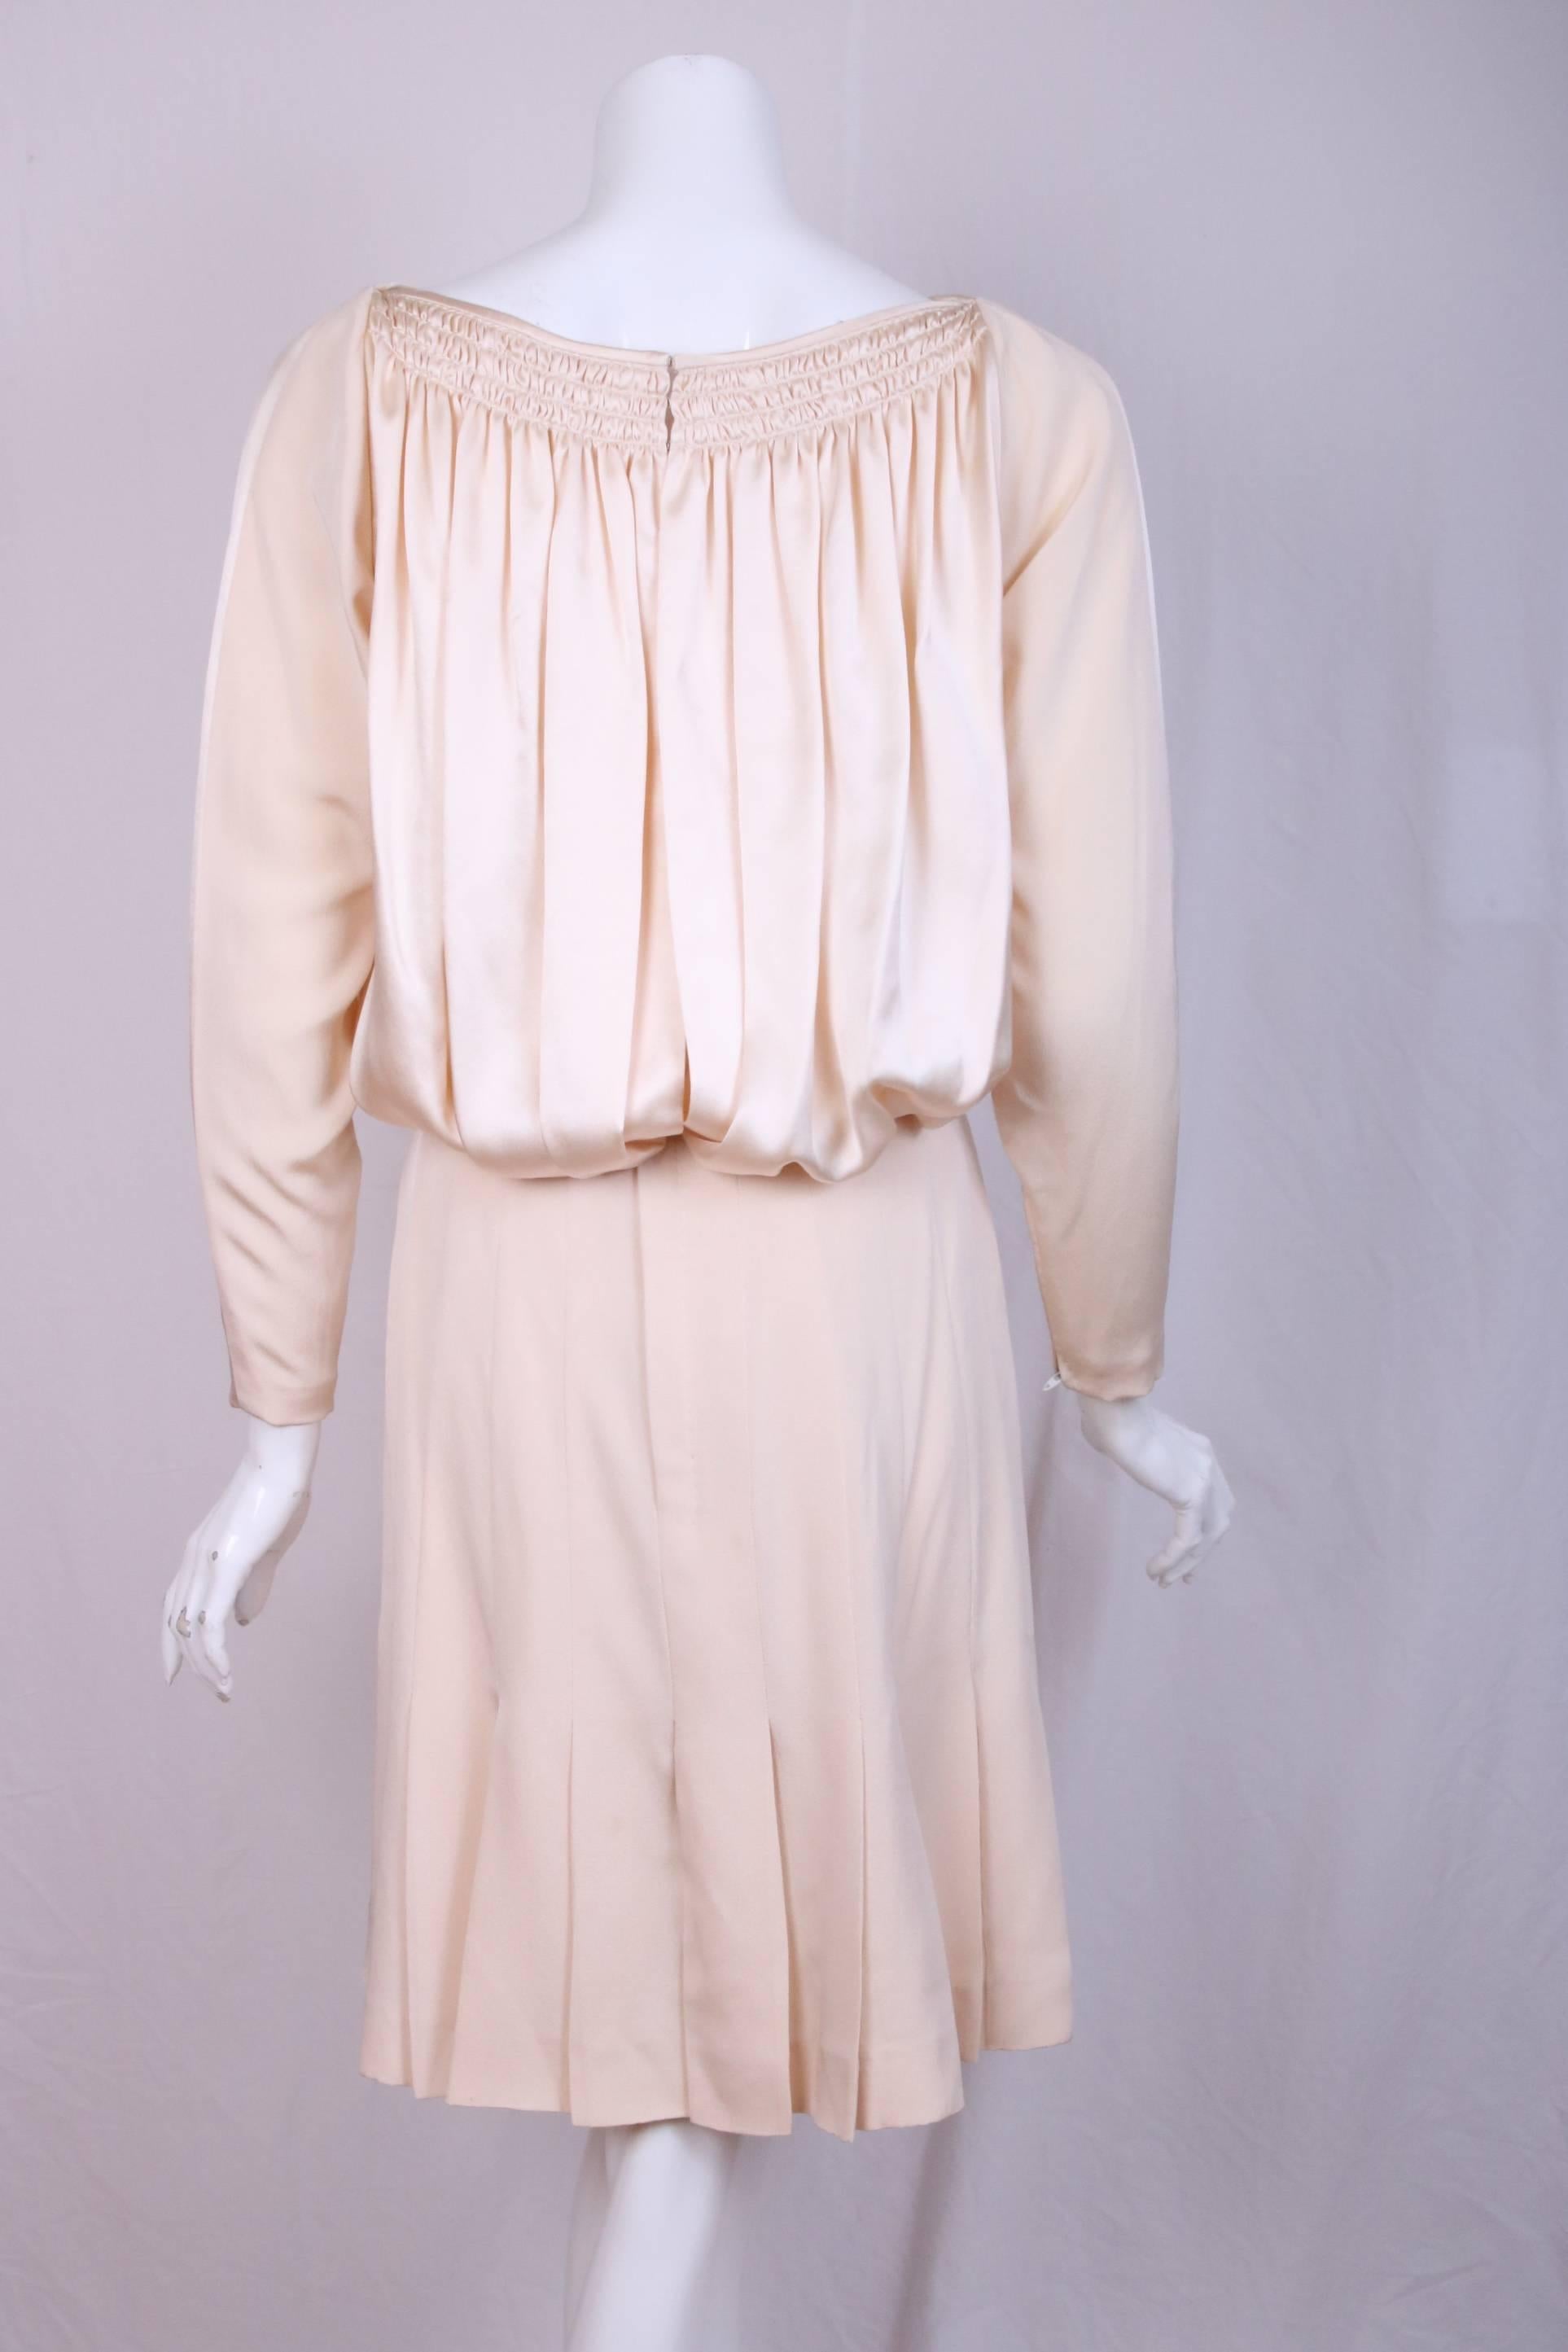 Vintage Galanos silk charmeuse & silk twill cocktail dress. The top is done in silk charmeuse with 3 rows of delicate smocking that create soft gathers that cascade to create a blouson effect. The skirt is pleated silk twill that falls just above